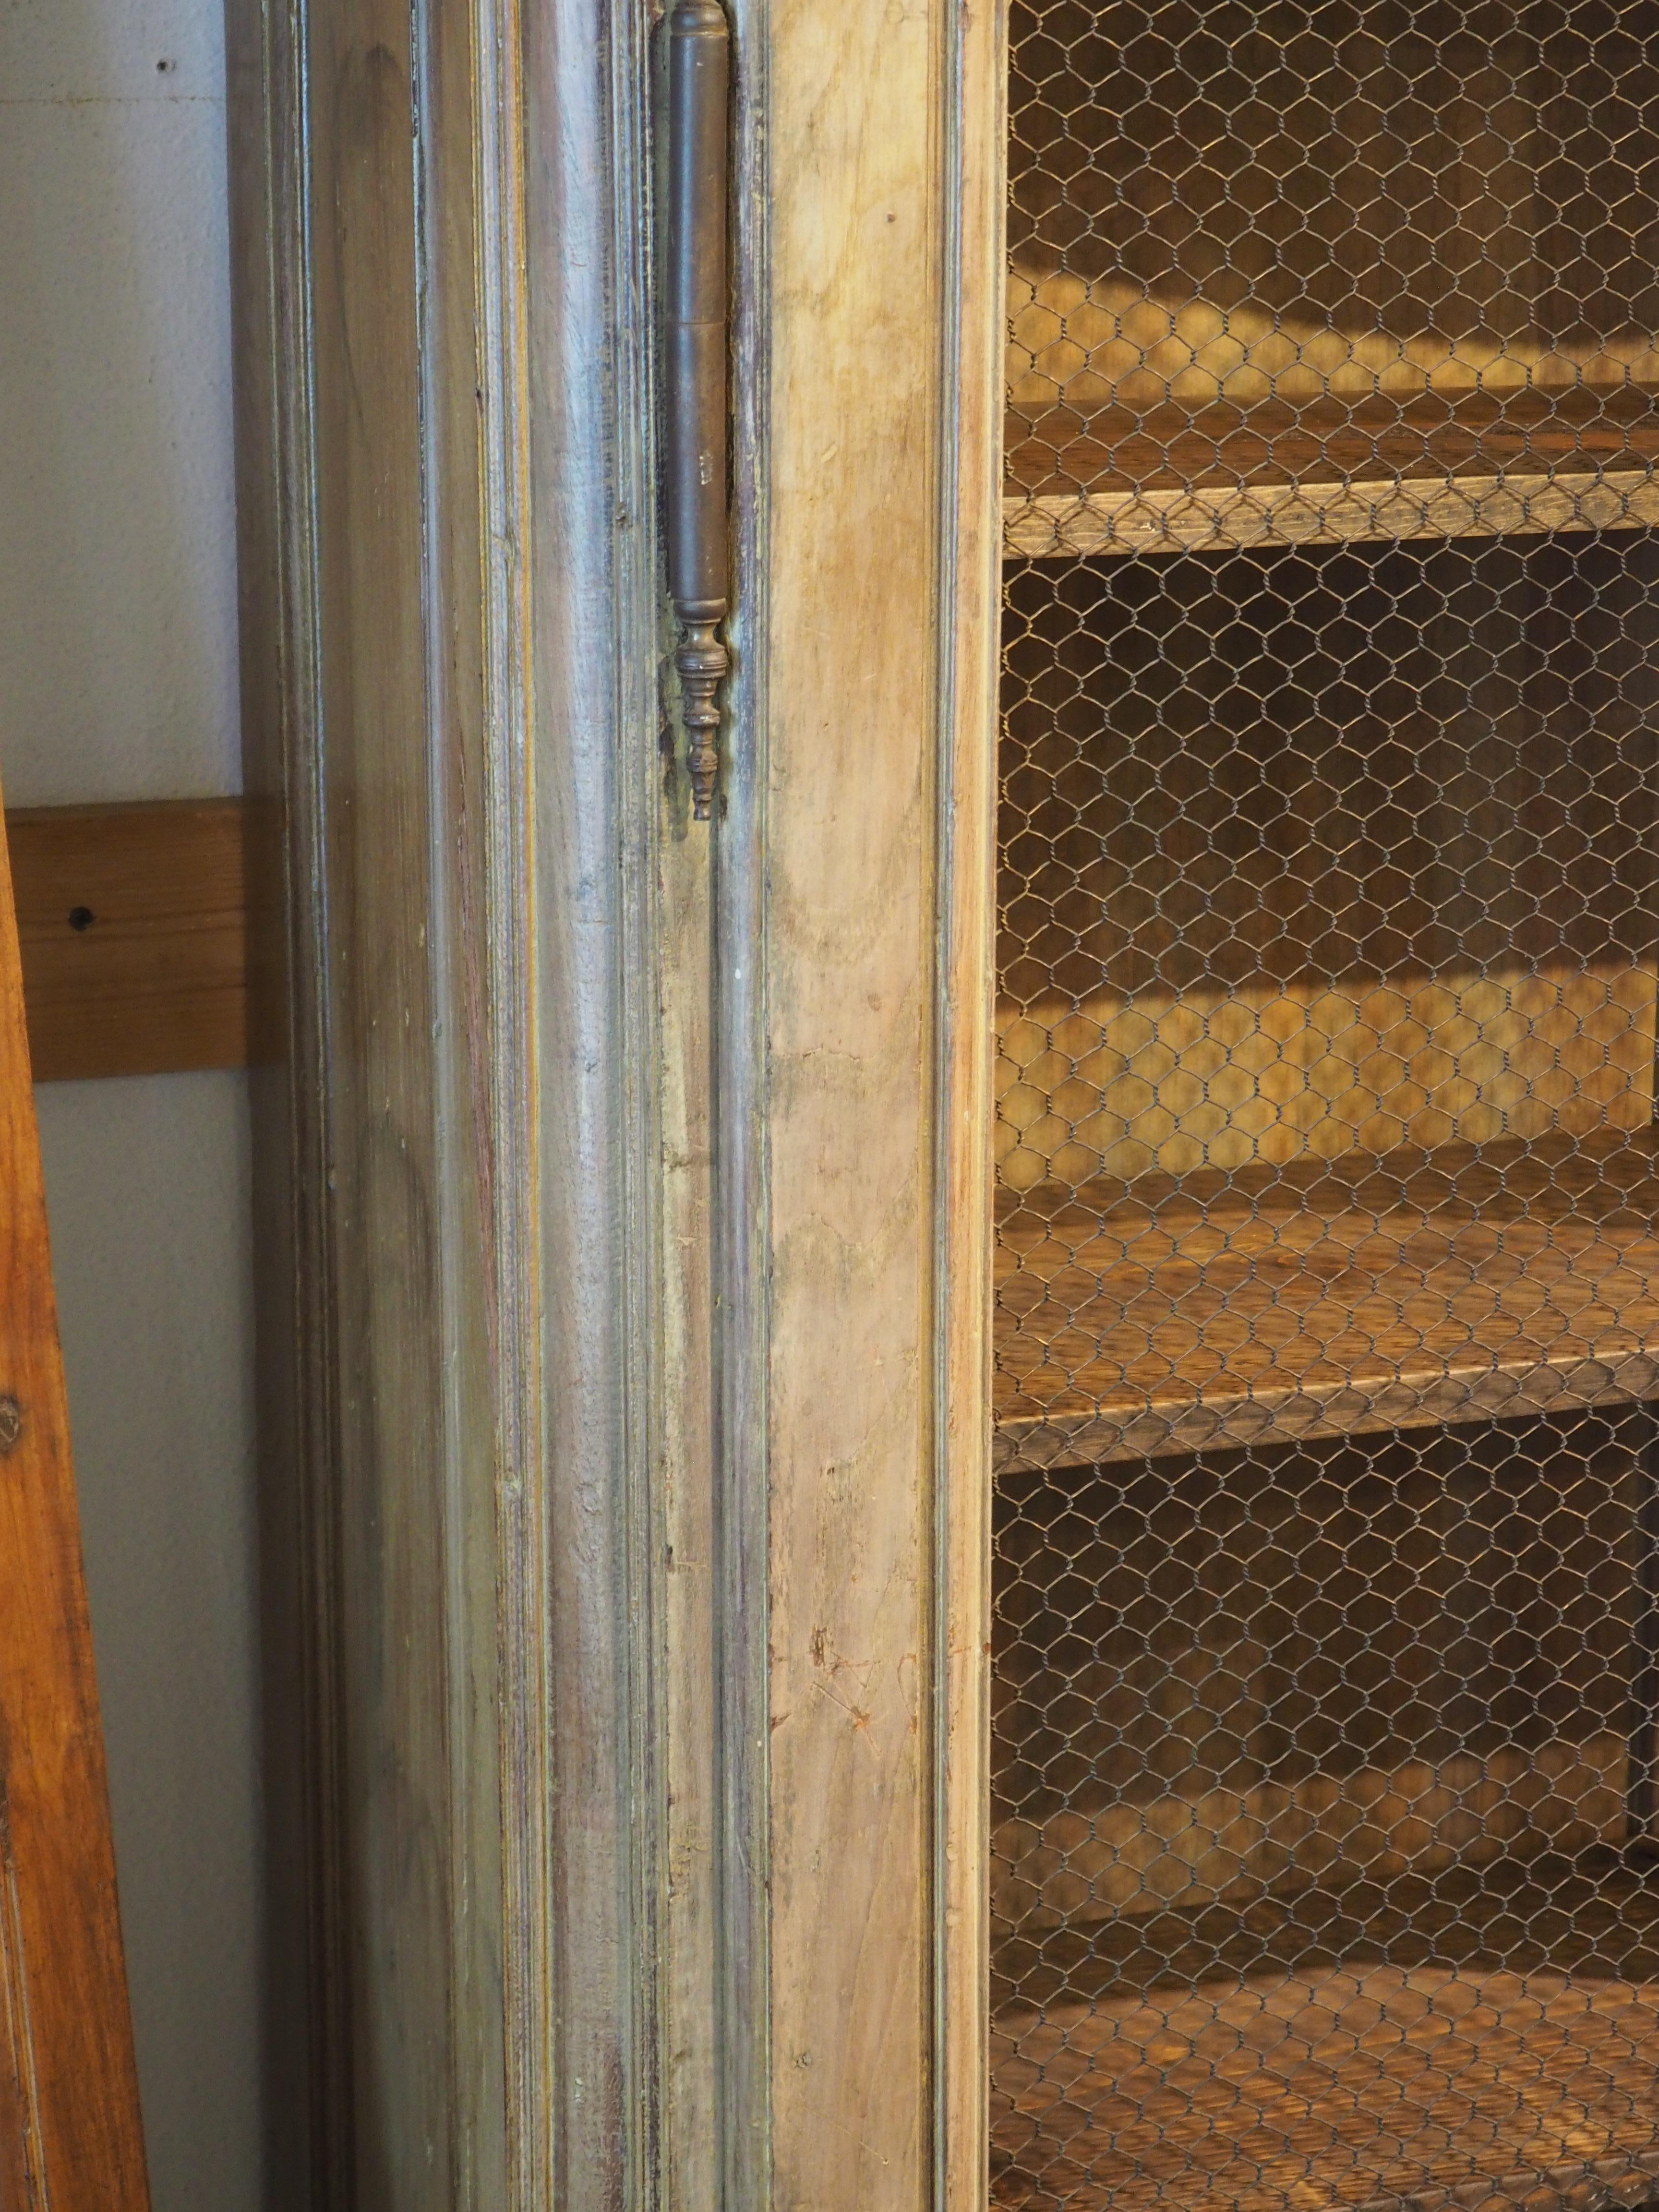 Early 19th Century French Bibliotheque Cabinet with Wire Mesh Door Panels 5